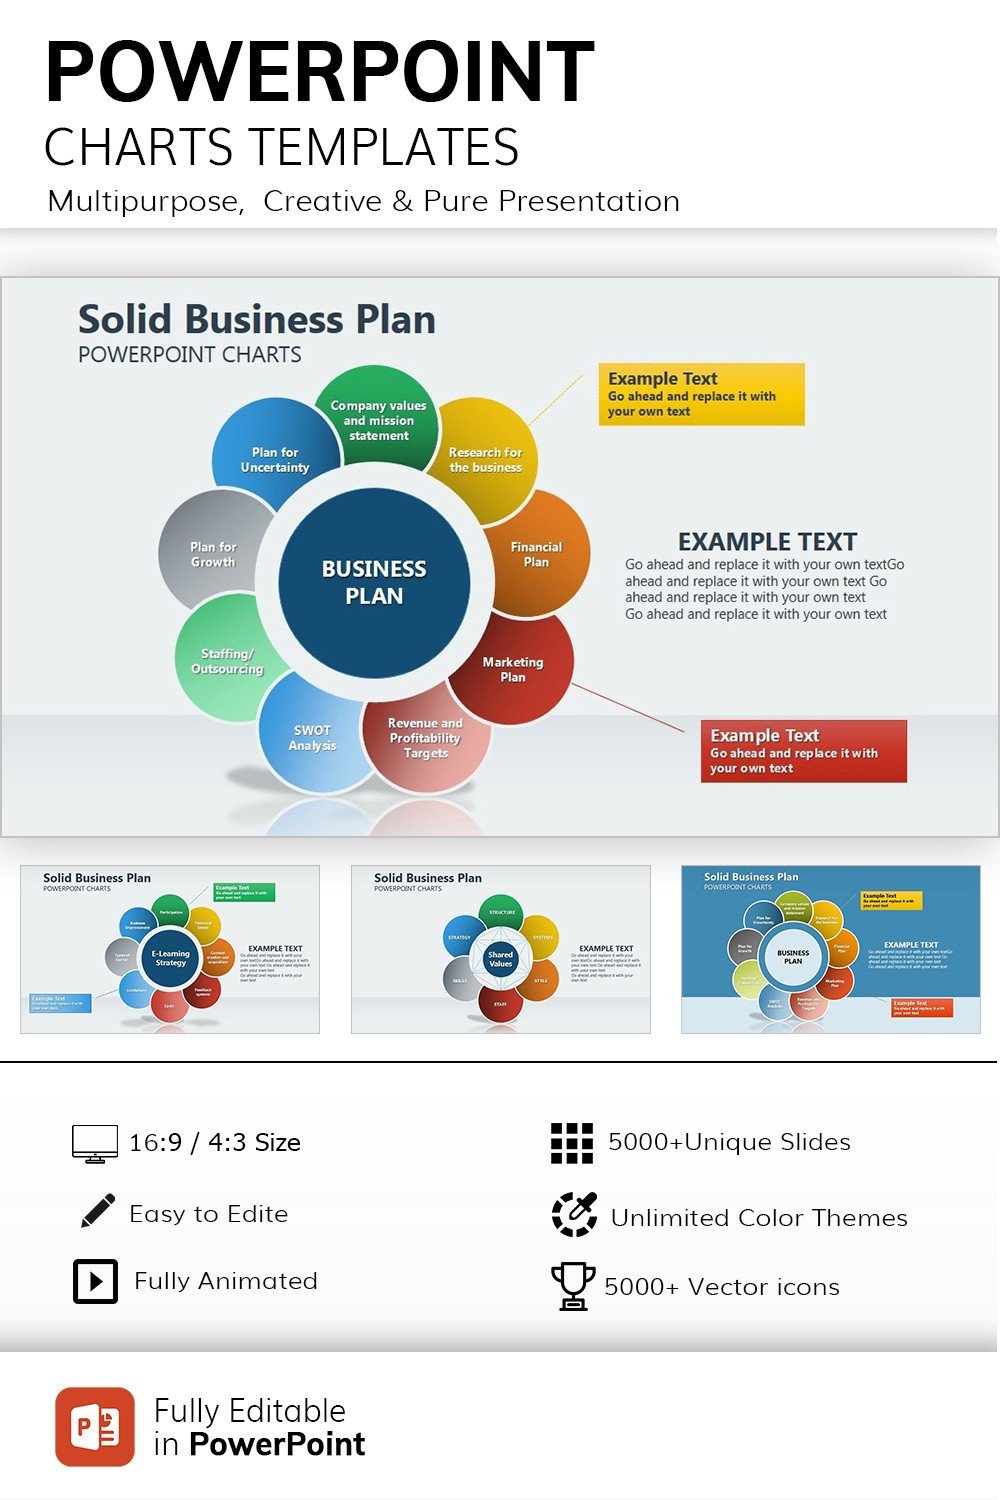 solid-business-plan-powerpoint-charts